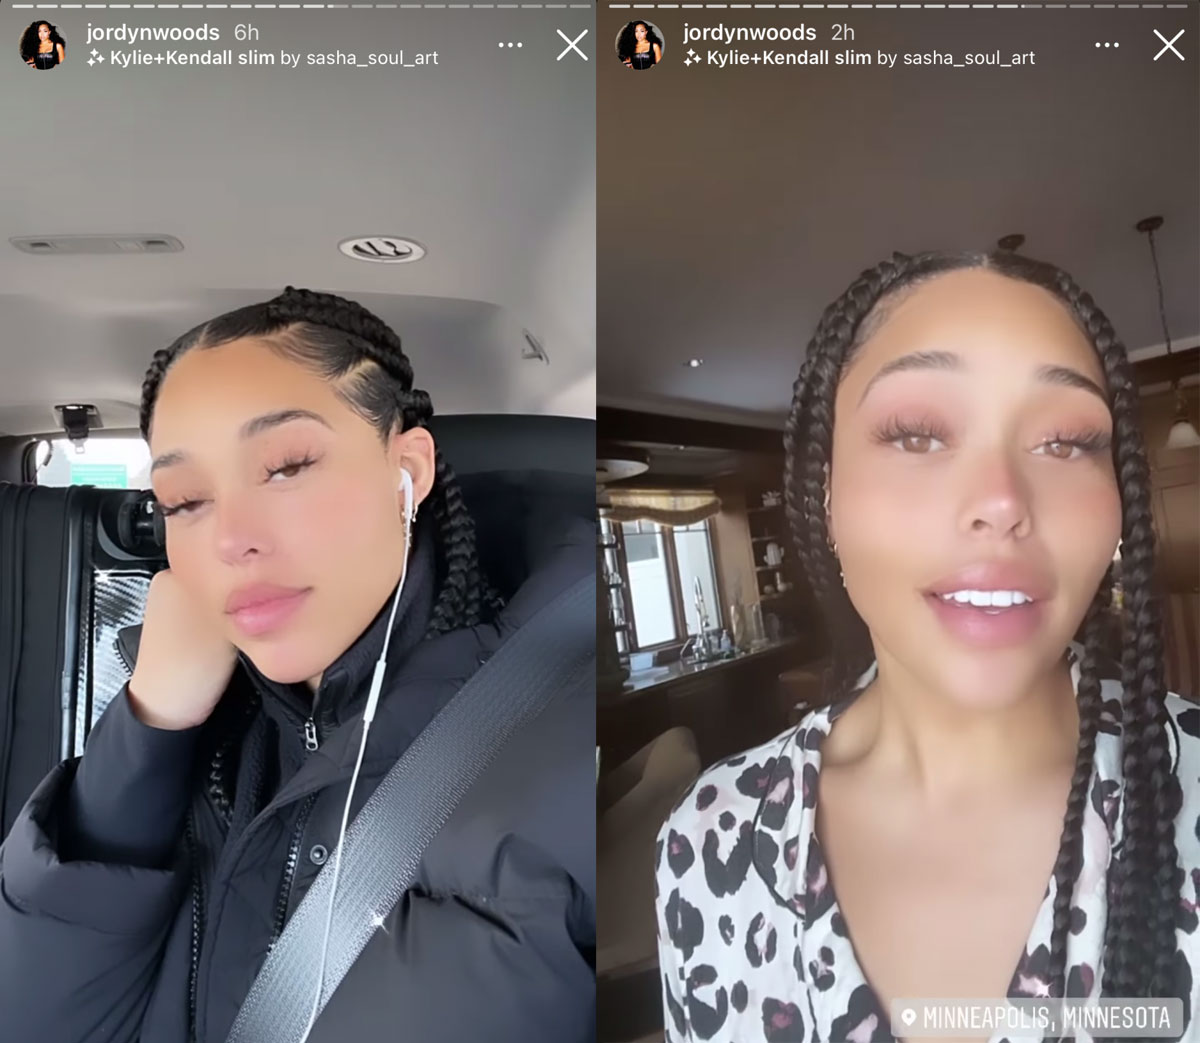 Did Jordyn Woods just low key shout out Kylie Jenner with this Instagram filter choice?!